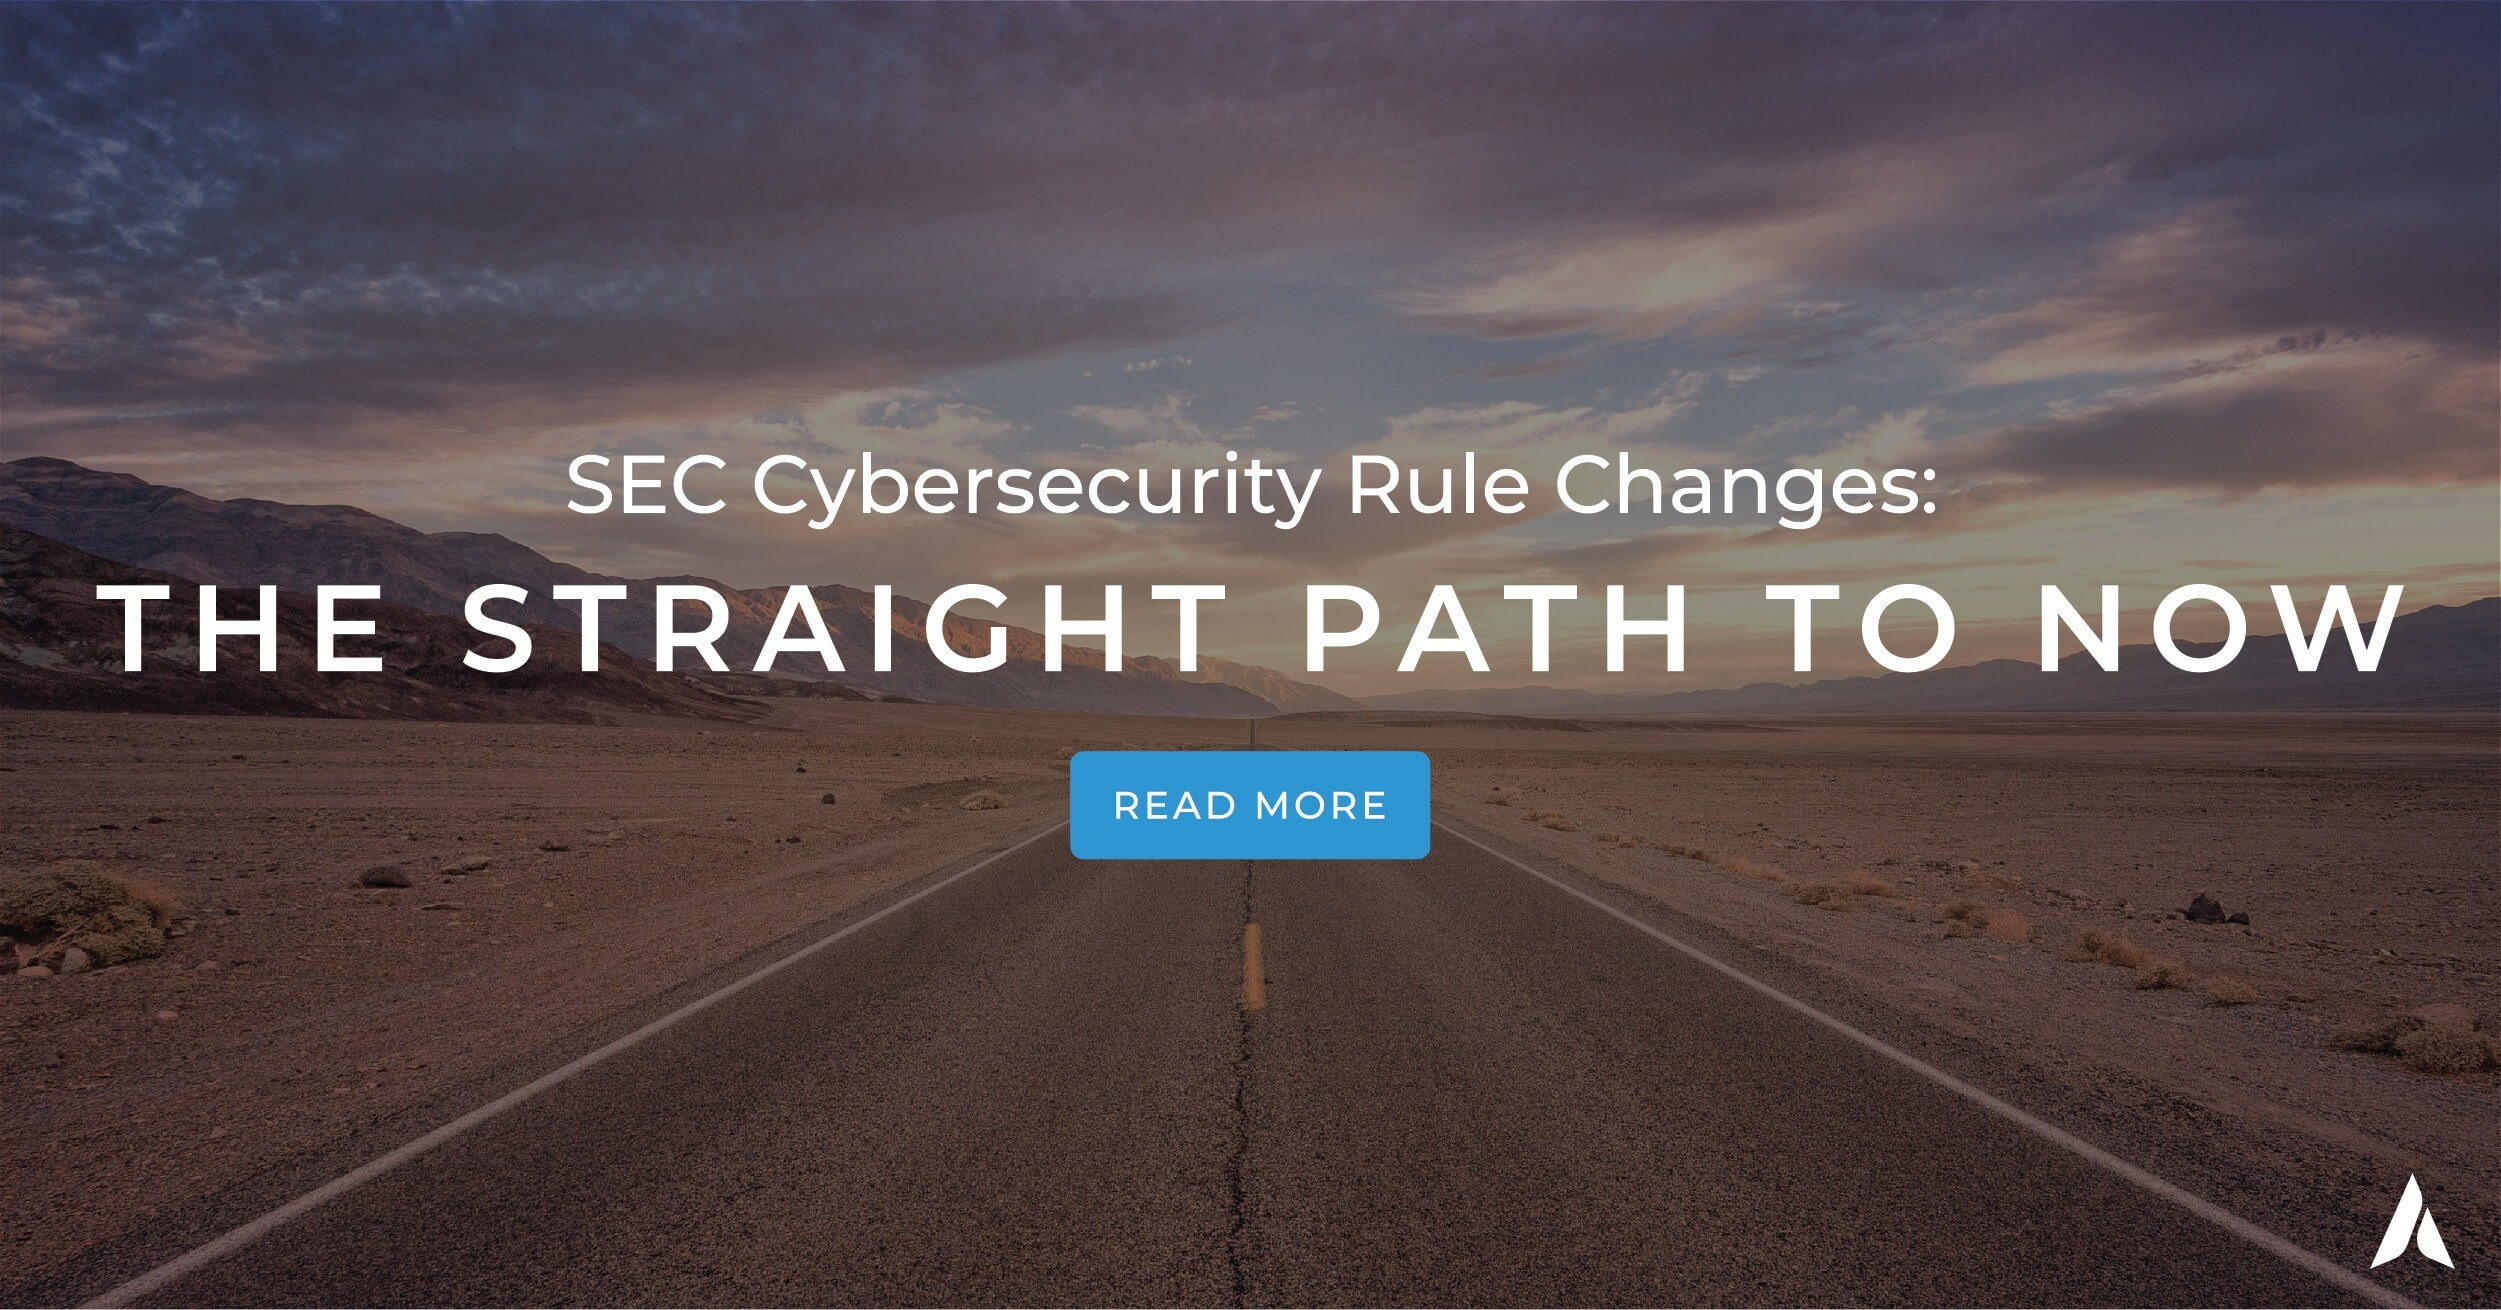 SEC Cybersecurity Rule Changes The Straight Path to Now